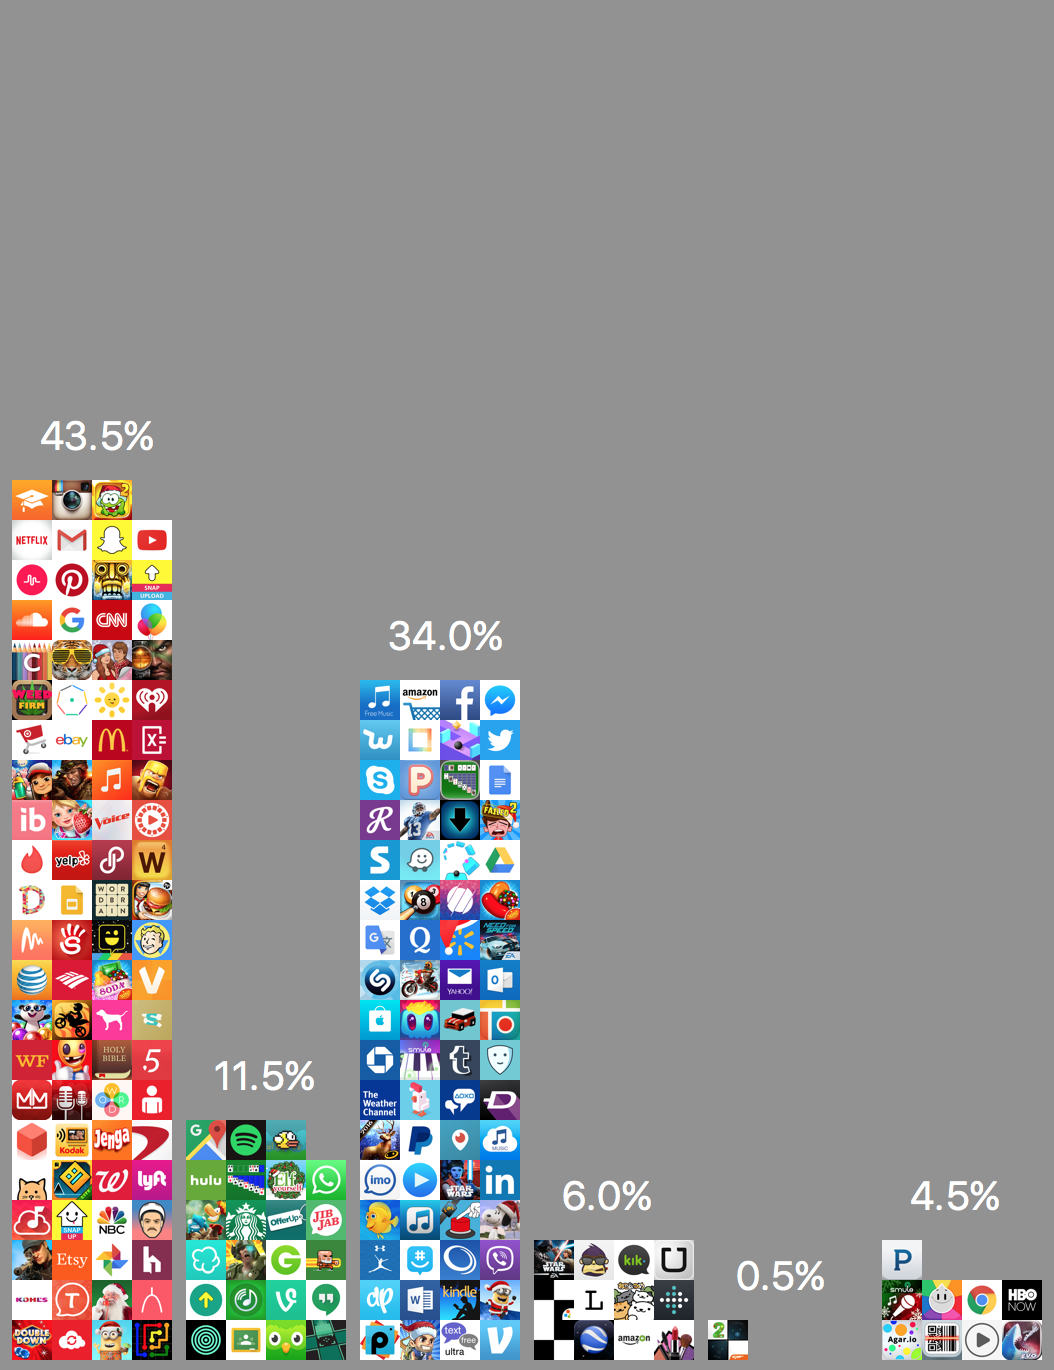 Icons of Top 200 Free Apps in the iOS App Store grouped into red, green, blue, black, white, gray